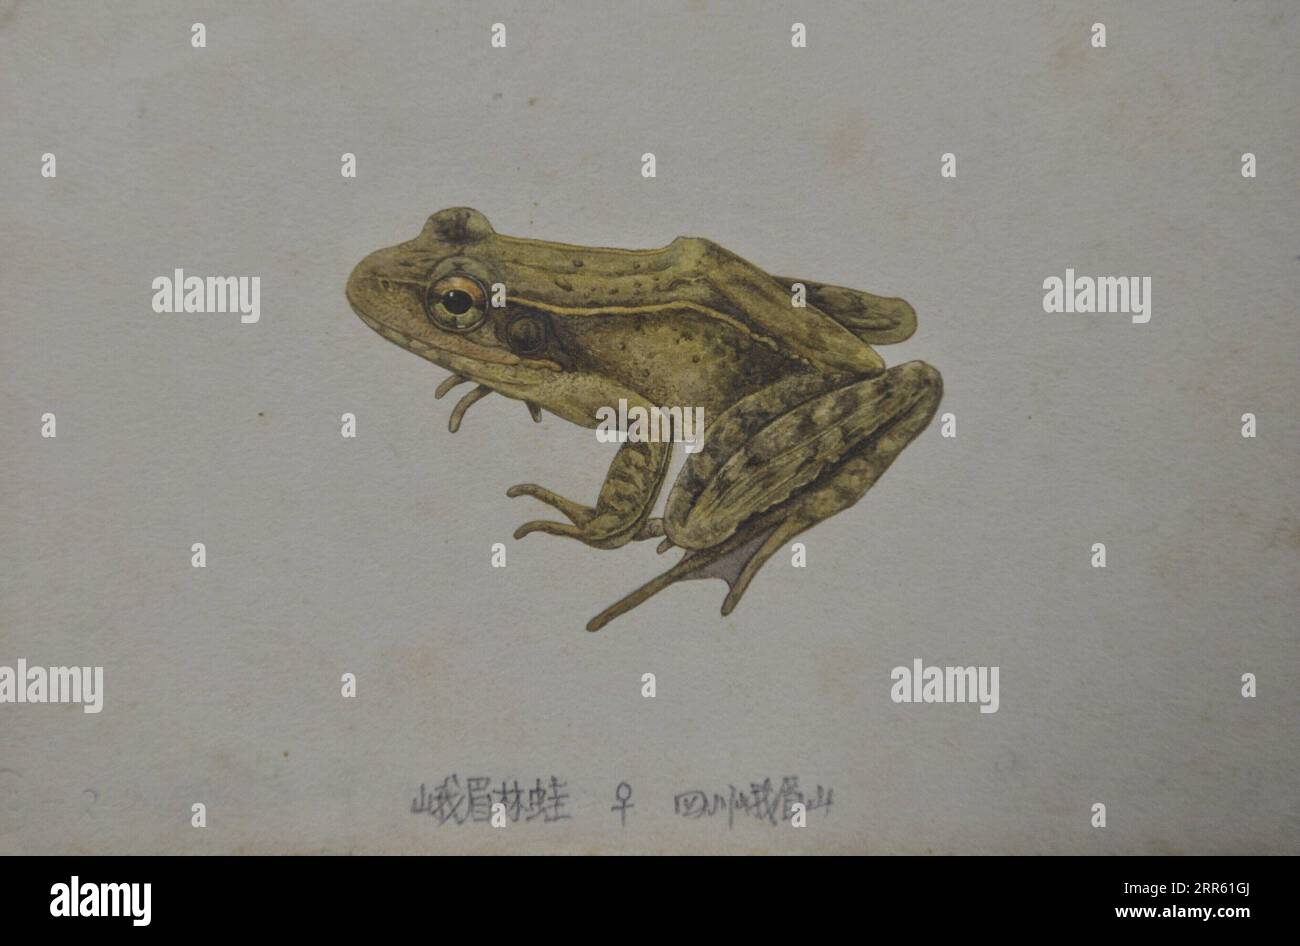 210121 -- CHENGDU, Jan. 21, 2021 -- Photo taken on Jan. 20, 2021 shows a picture of a kind of frog drawn by Fei Liang and Ye Changyuan which they discovered in 1992 in southwest China s Sichuan Province. Fei Liang, 84 years old, and Ye Changyuan, 82, are both researchers at the Chengdu Institute of Biology of the Chinese Academy of Sciences CAS. The elder couple have been doing herpetological research for 60 years. Due to the need of their work, they often had to stay in the wild for more than half a year. Among the 117,000 samples displayed inside the Herpetological Museum of the Chengdu Inst Stock Photo